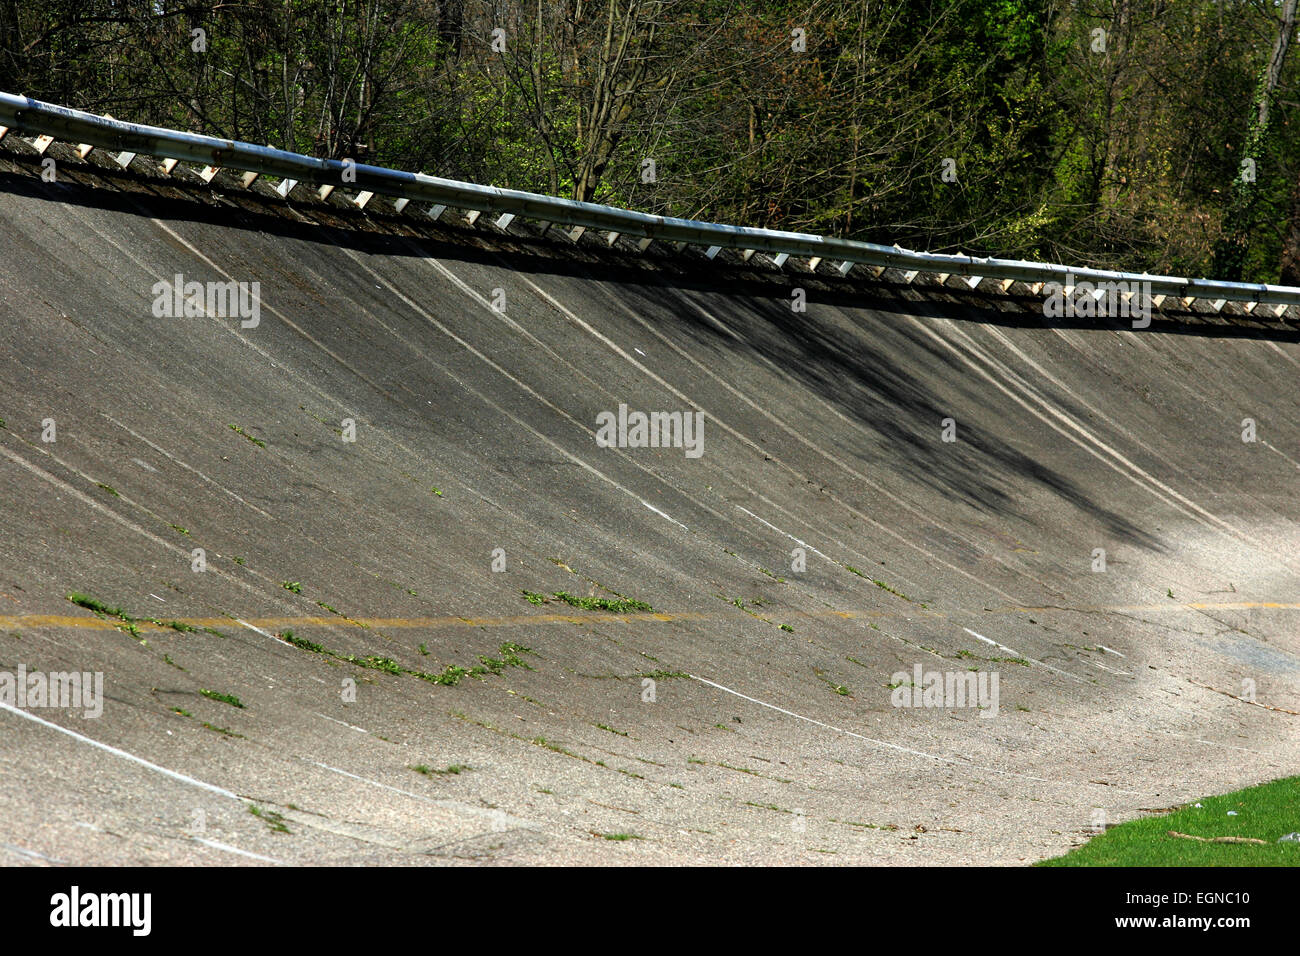 Old circuit banking at Monza, Italy Stock Photo